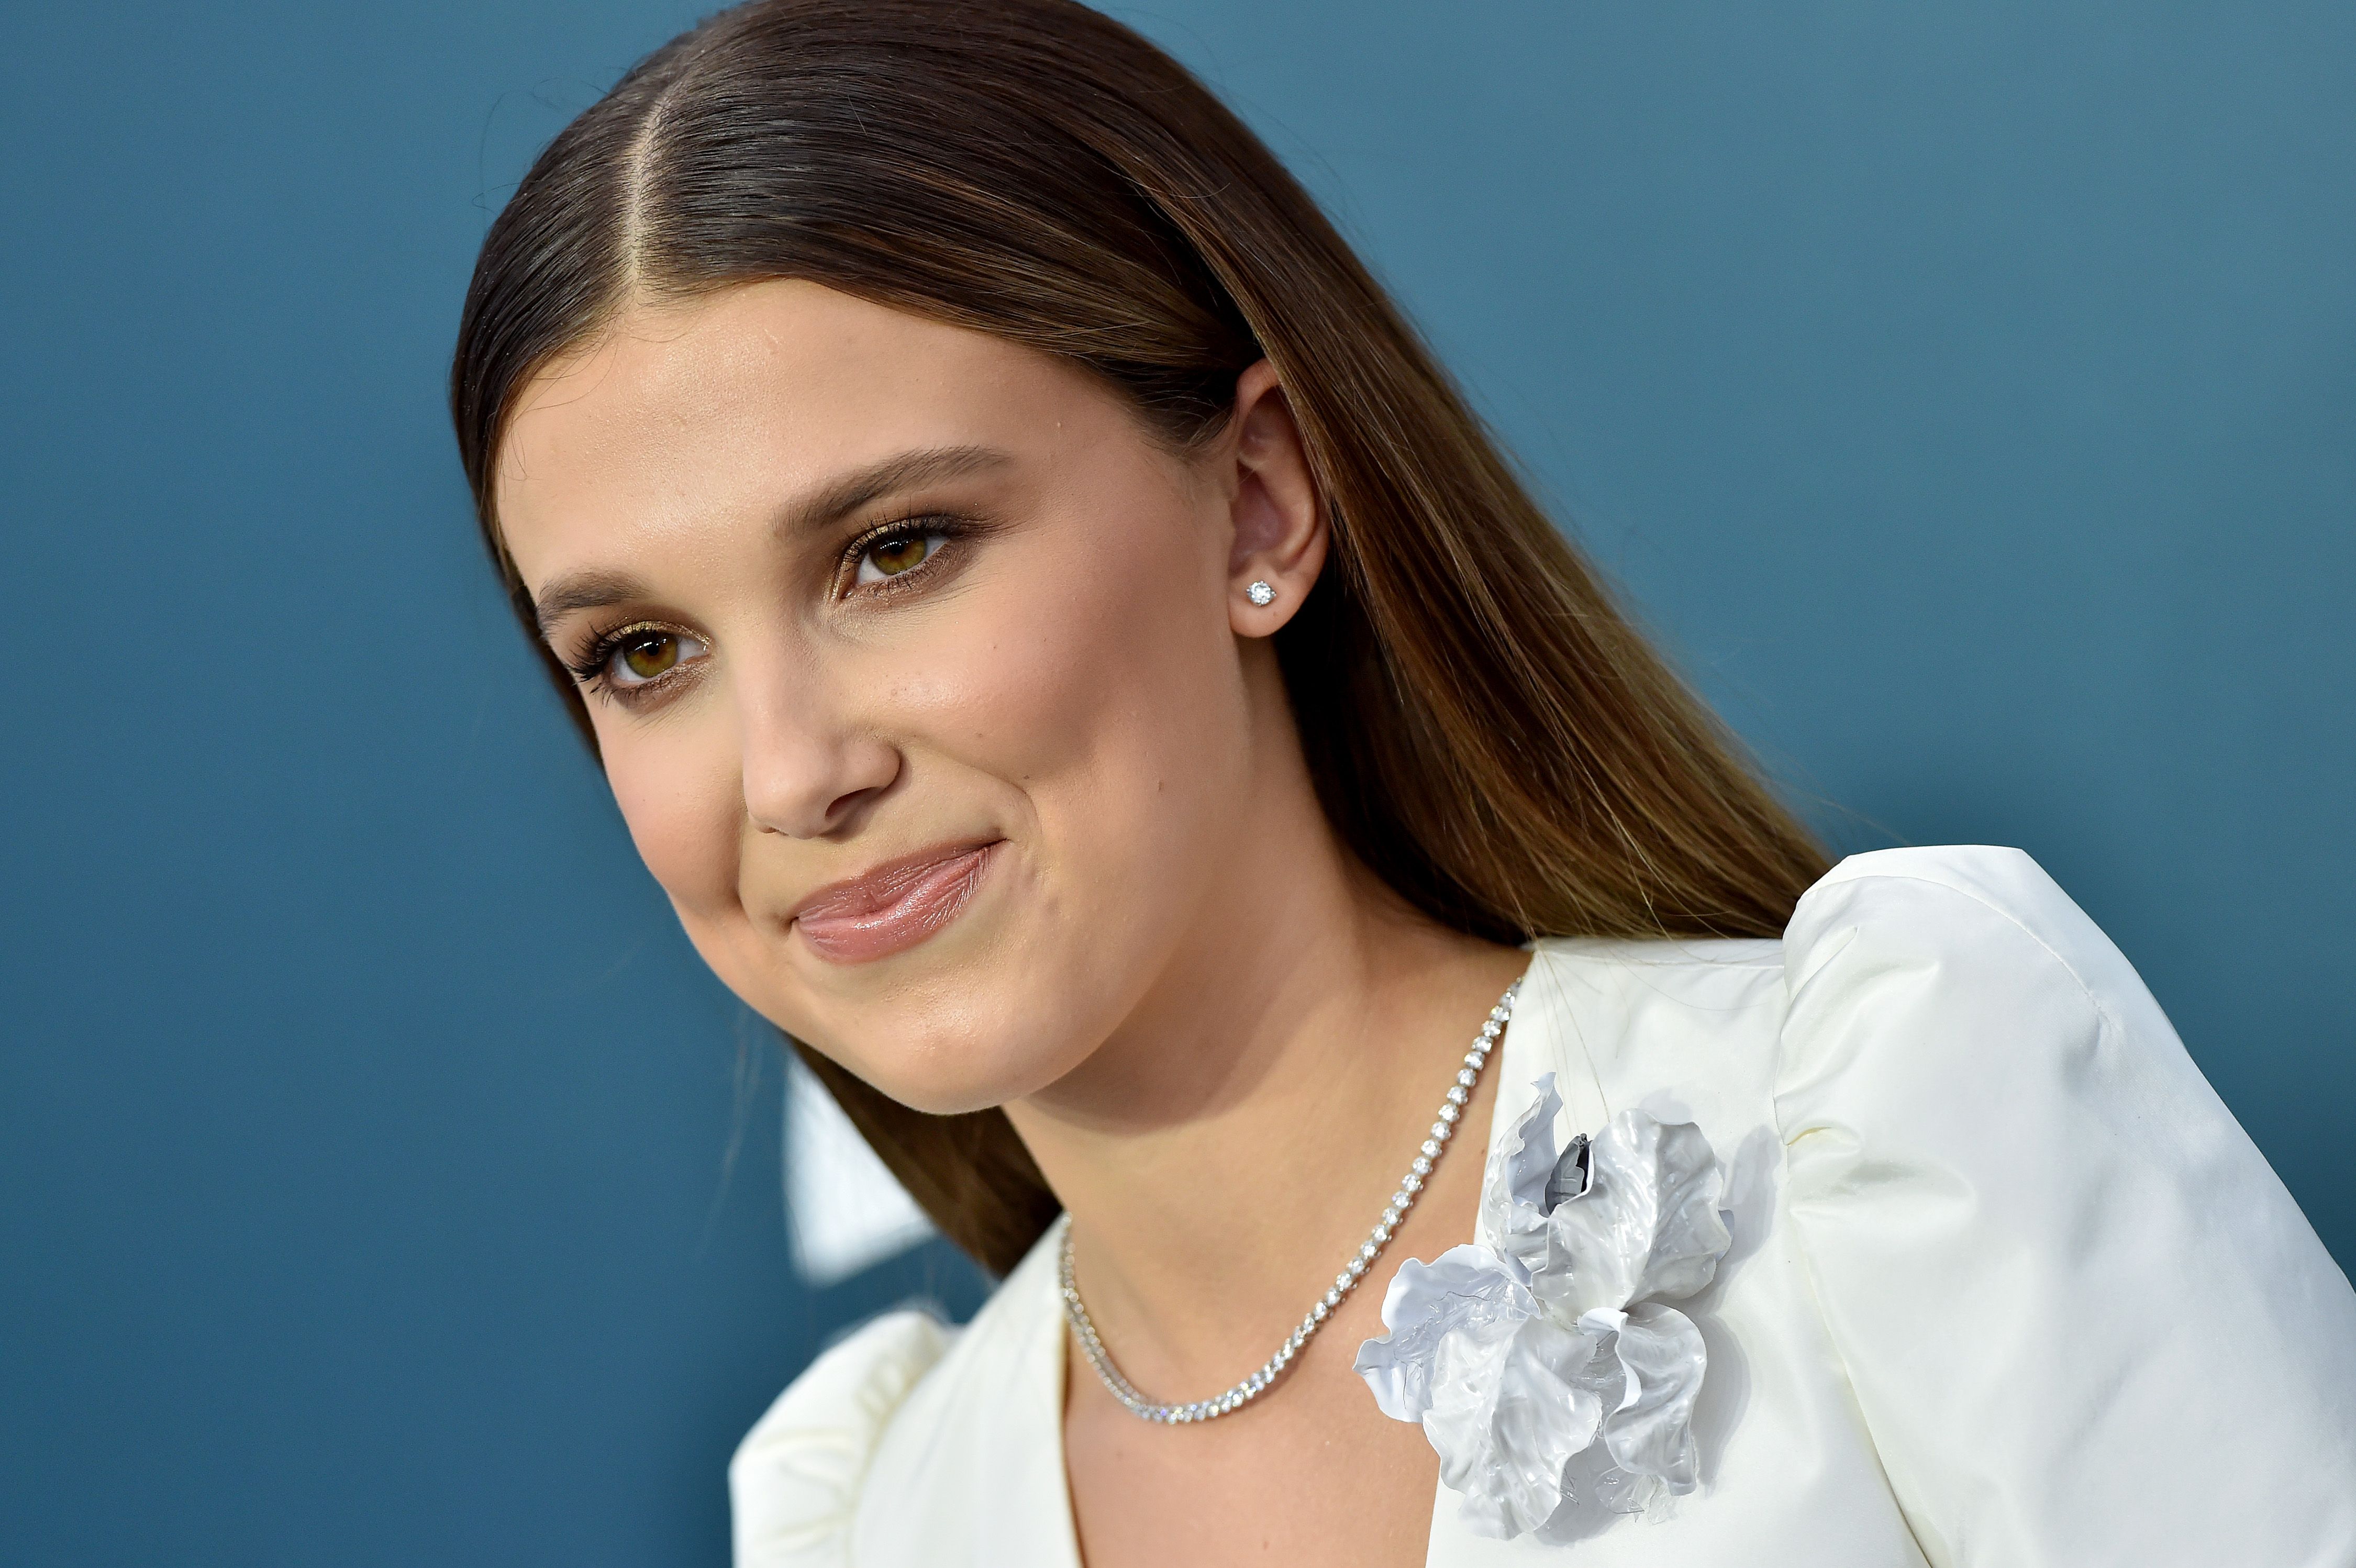 Millie Bobby Brown Went Full On 90s For Her 16th Birthday Party